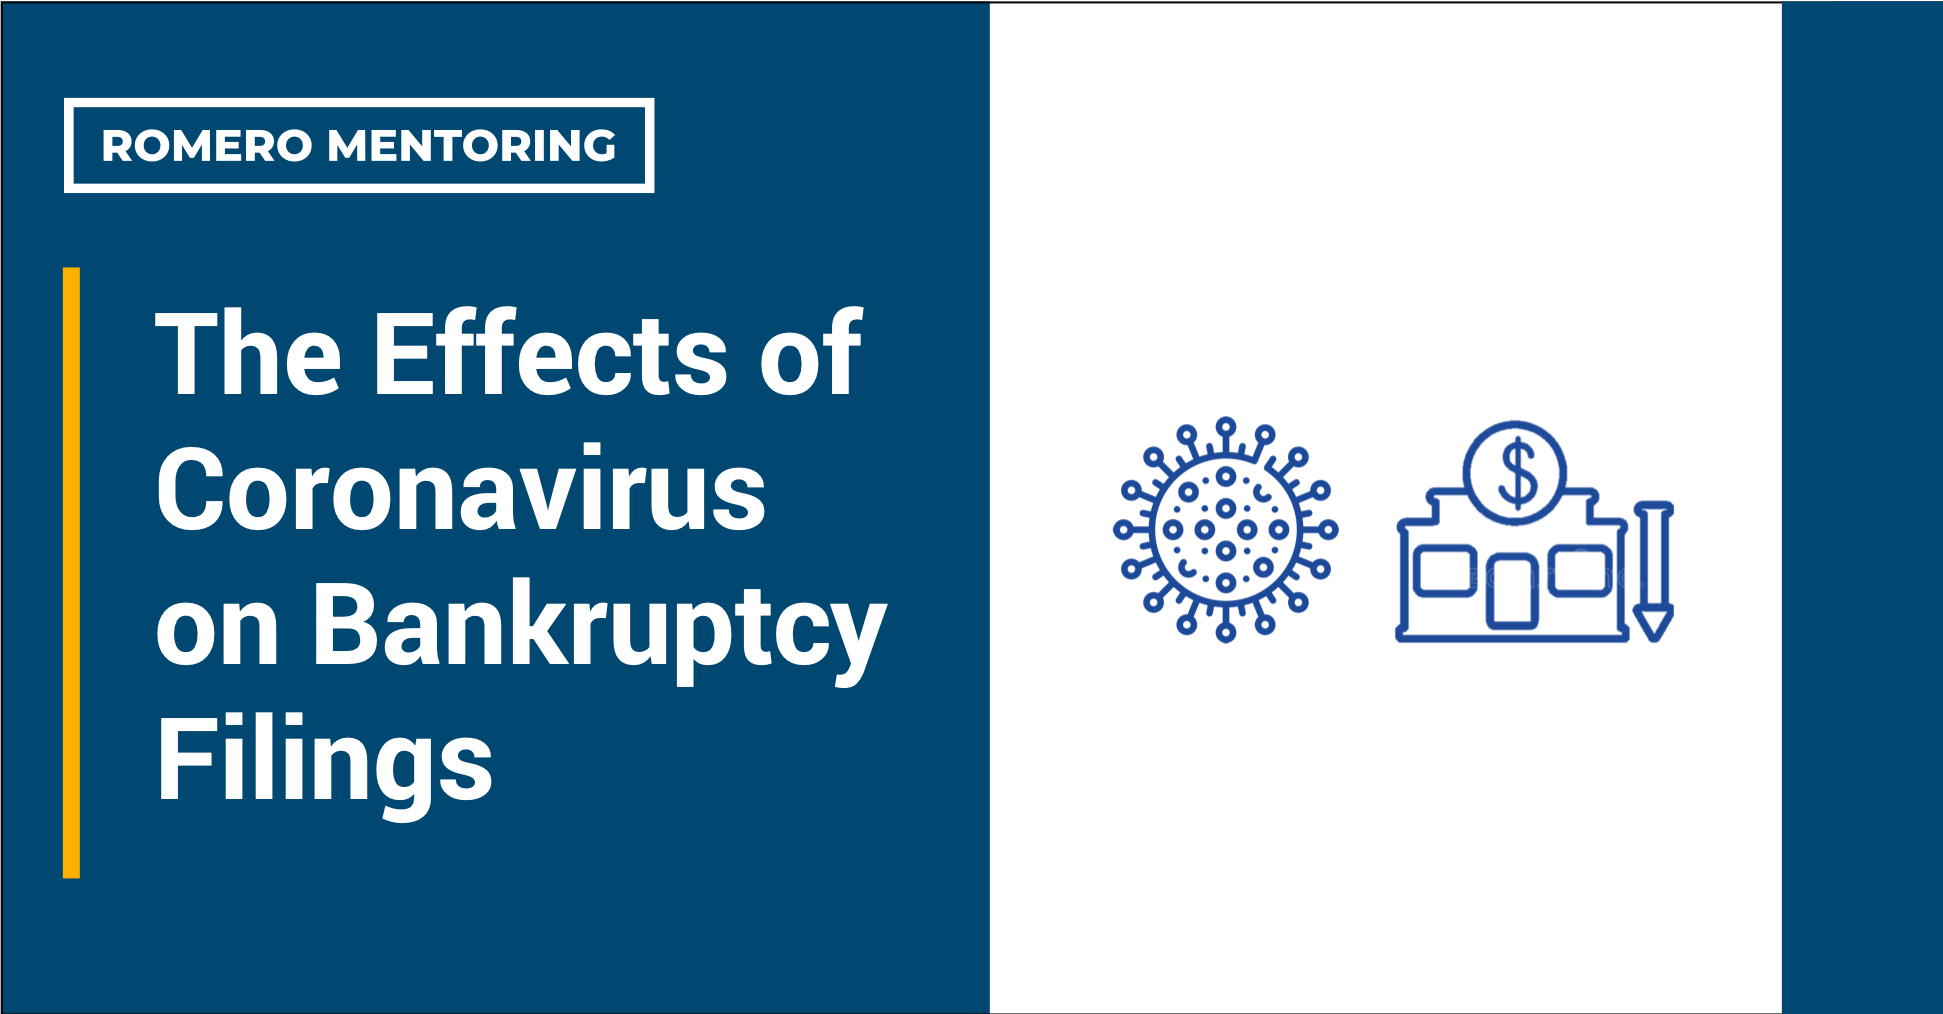 The Effects of Coronavirus on Bankruptcy Filings